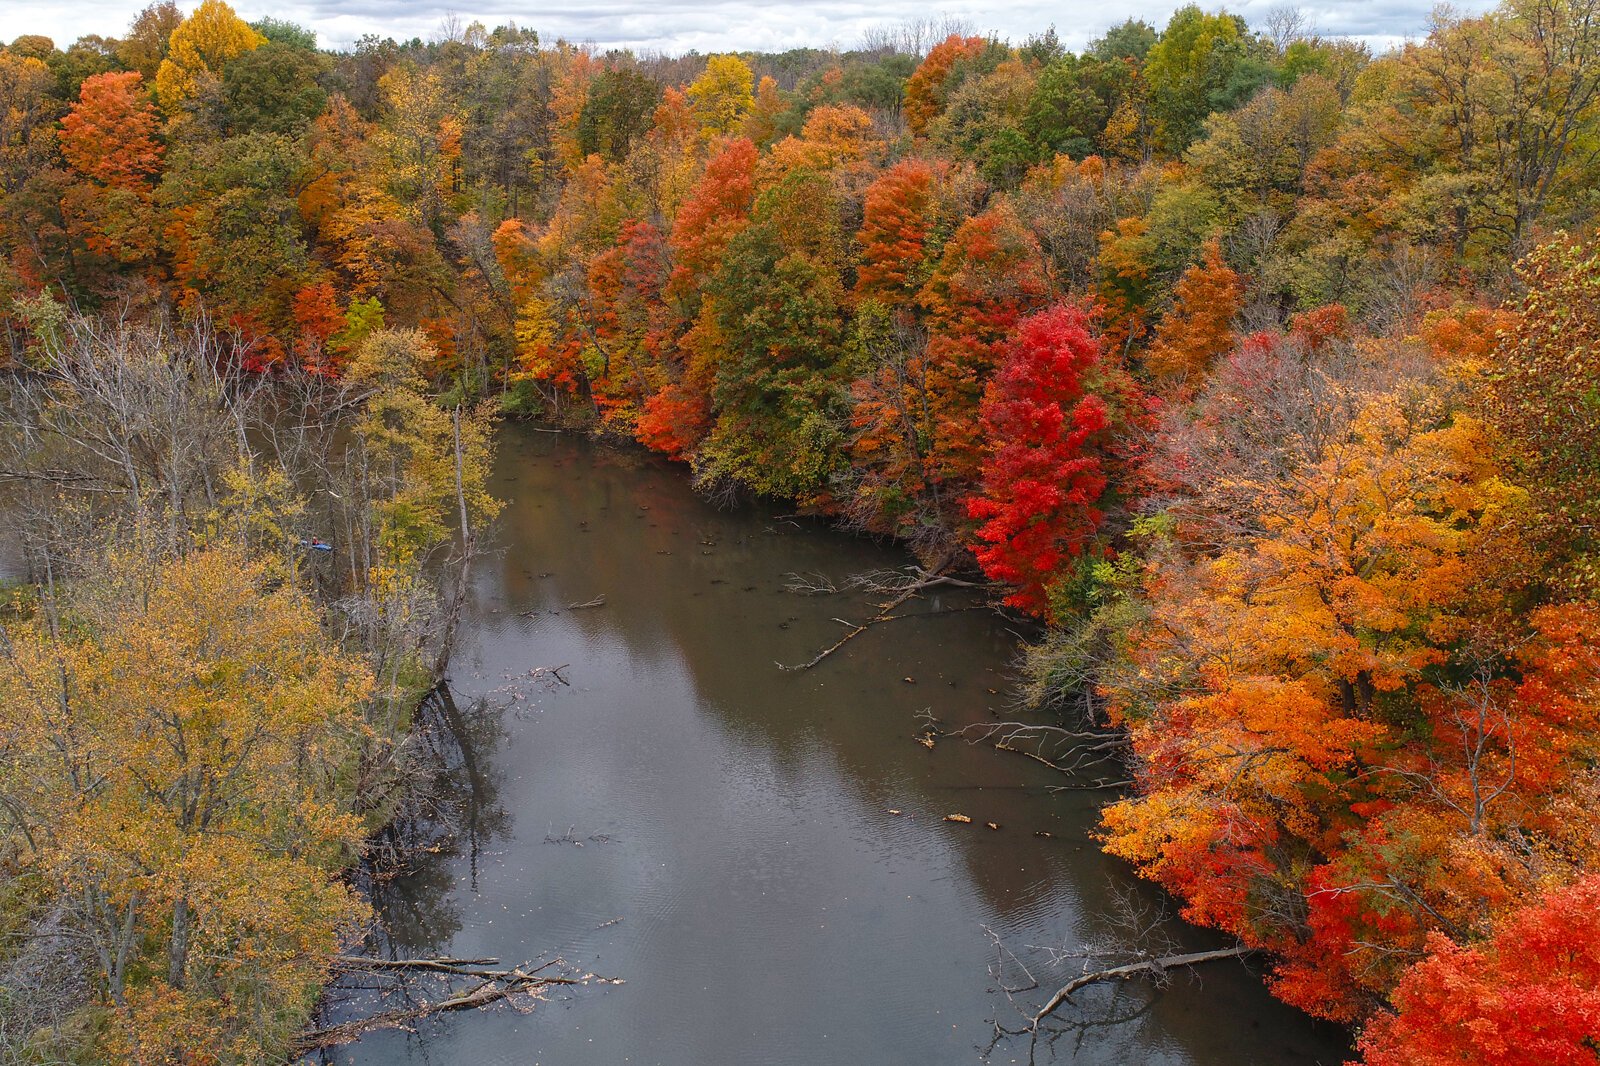 Fall colors highlight a stretch of the Kalamazoo River in the Armintrout-Milbocker Nature Preserve.